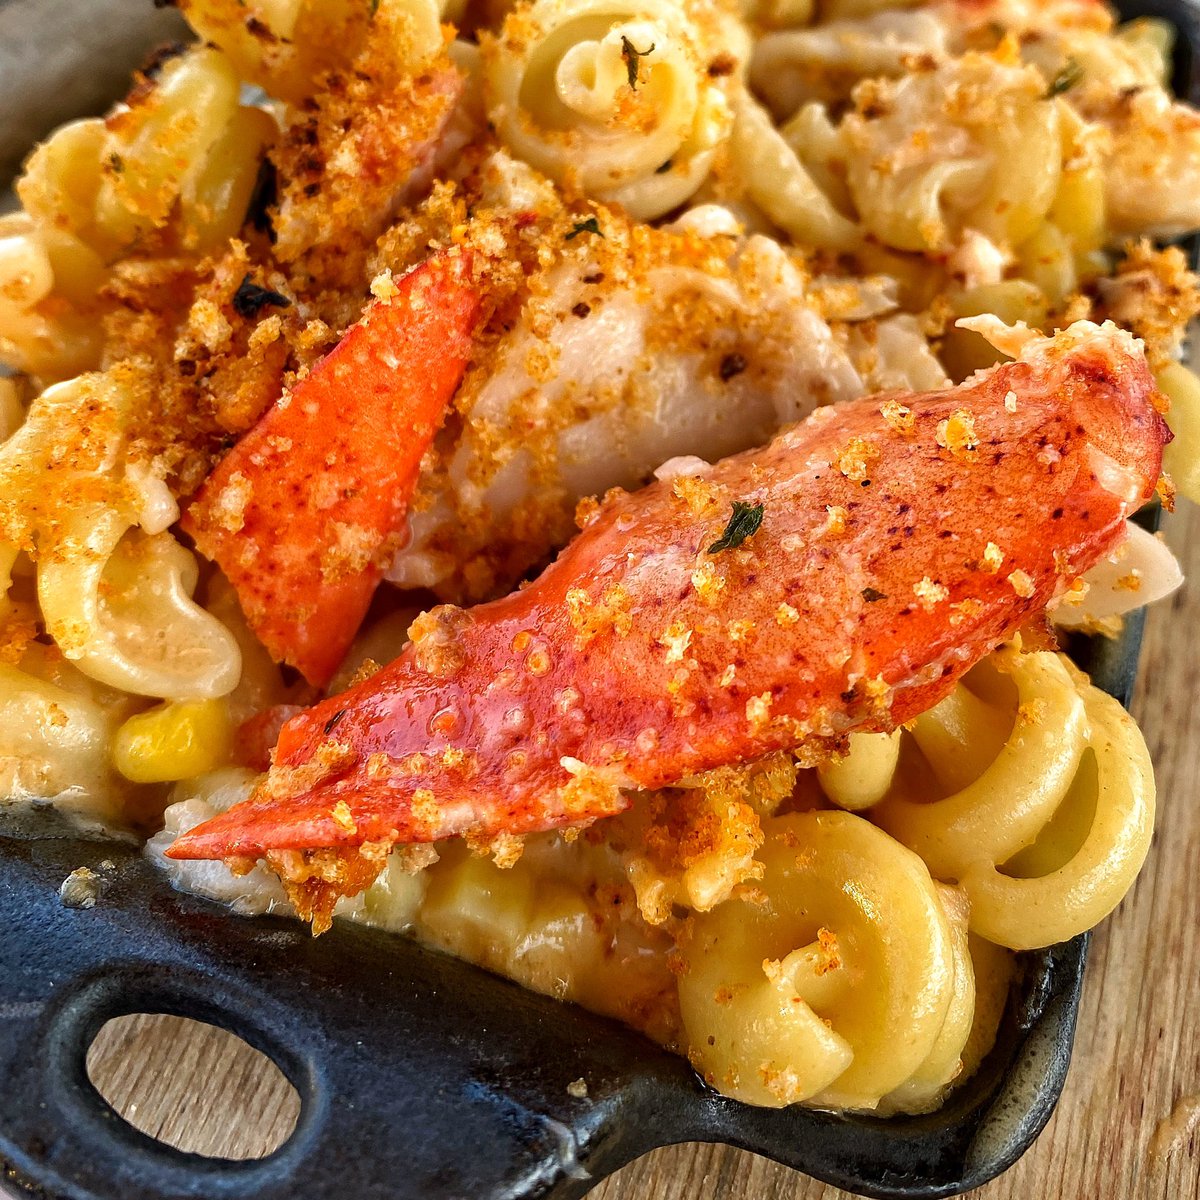 Lobster Mac and cheese for the win! #cheesy #macandcheese #lobster #lobstermac #eatsandthecity